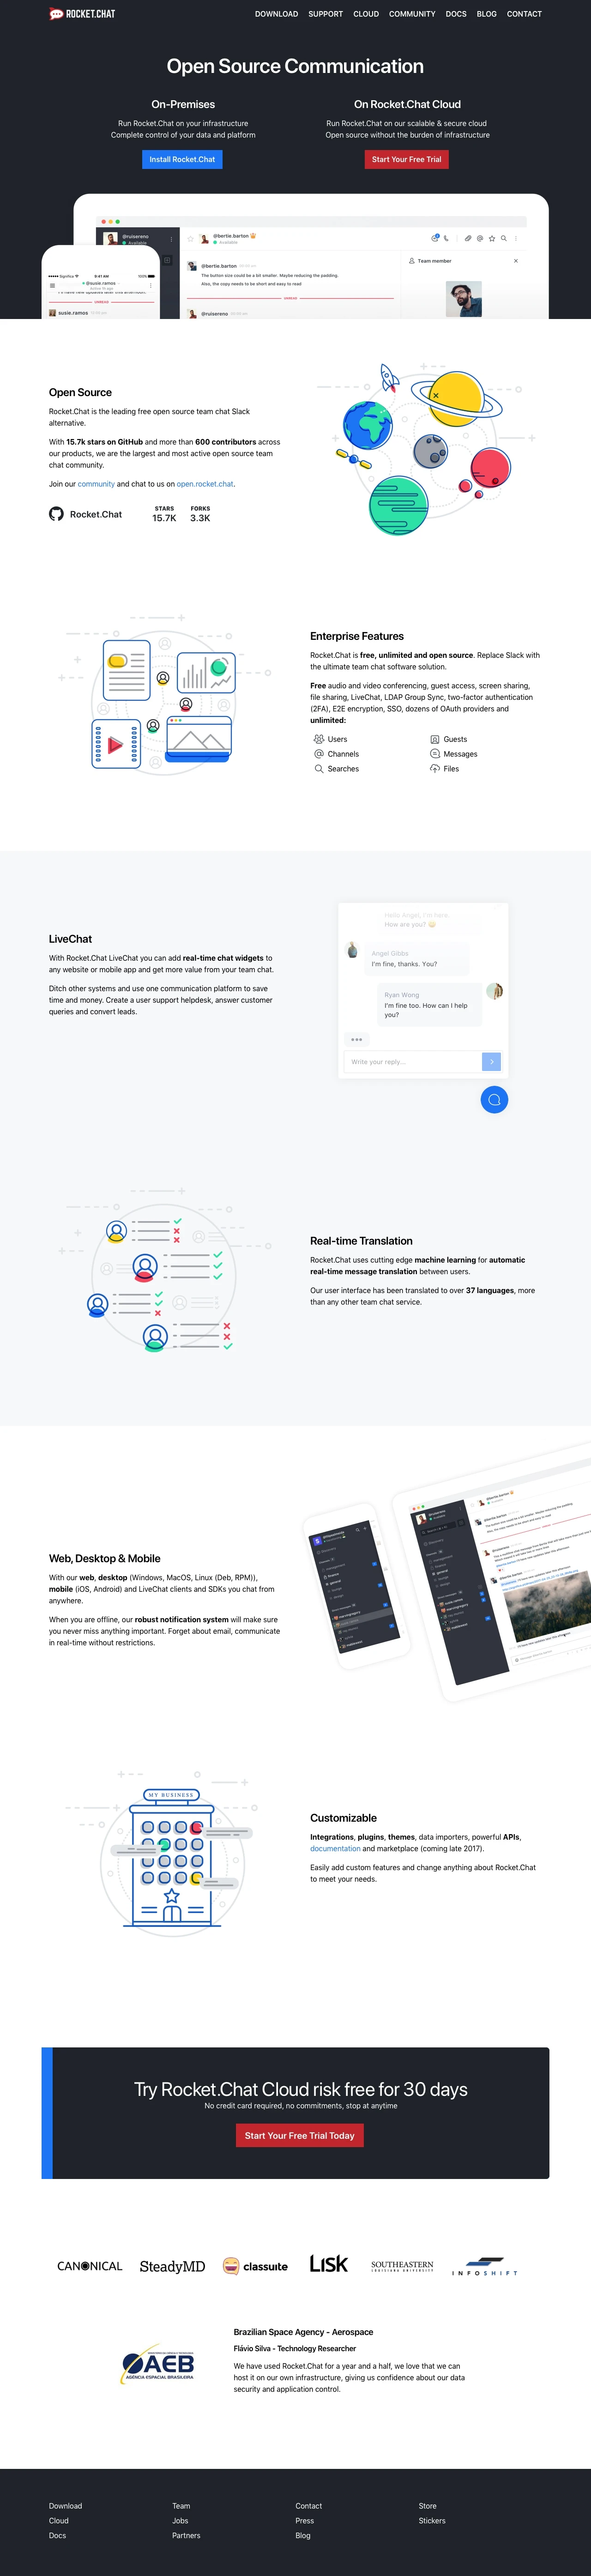 Rocket.Chat Landing Page Example: Rocket.Chat is the leading open source team chat software solution. Free, unlimited and completely customizable with on-premises and SaaS cloud hosting.